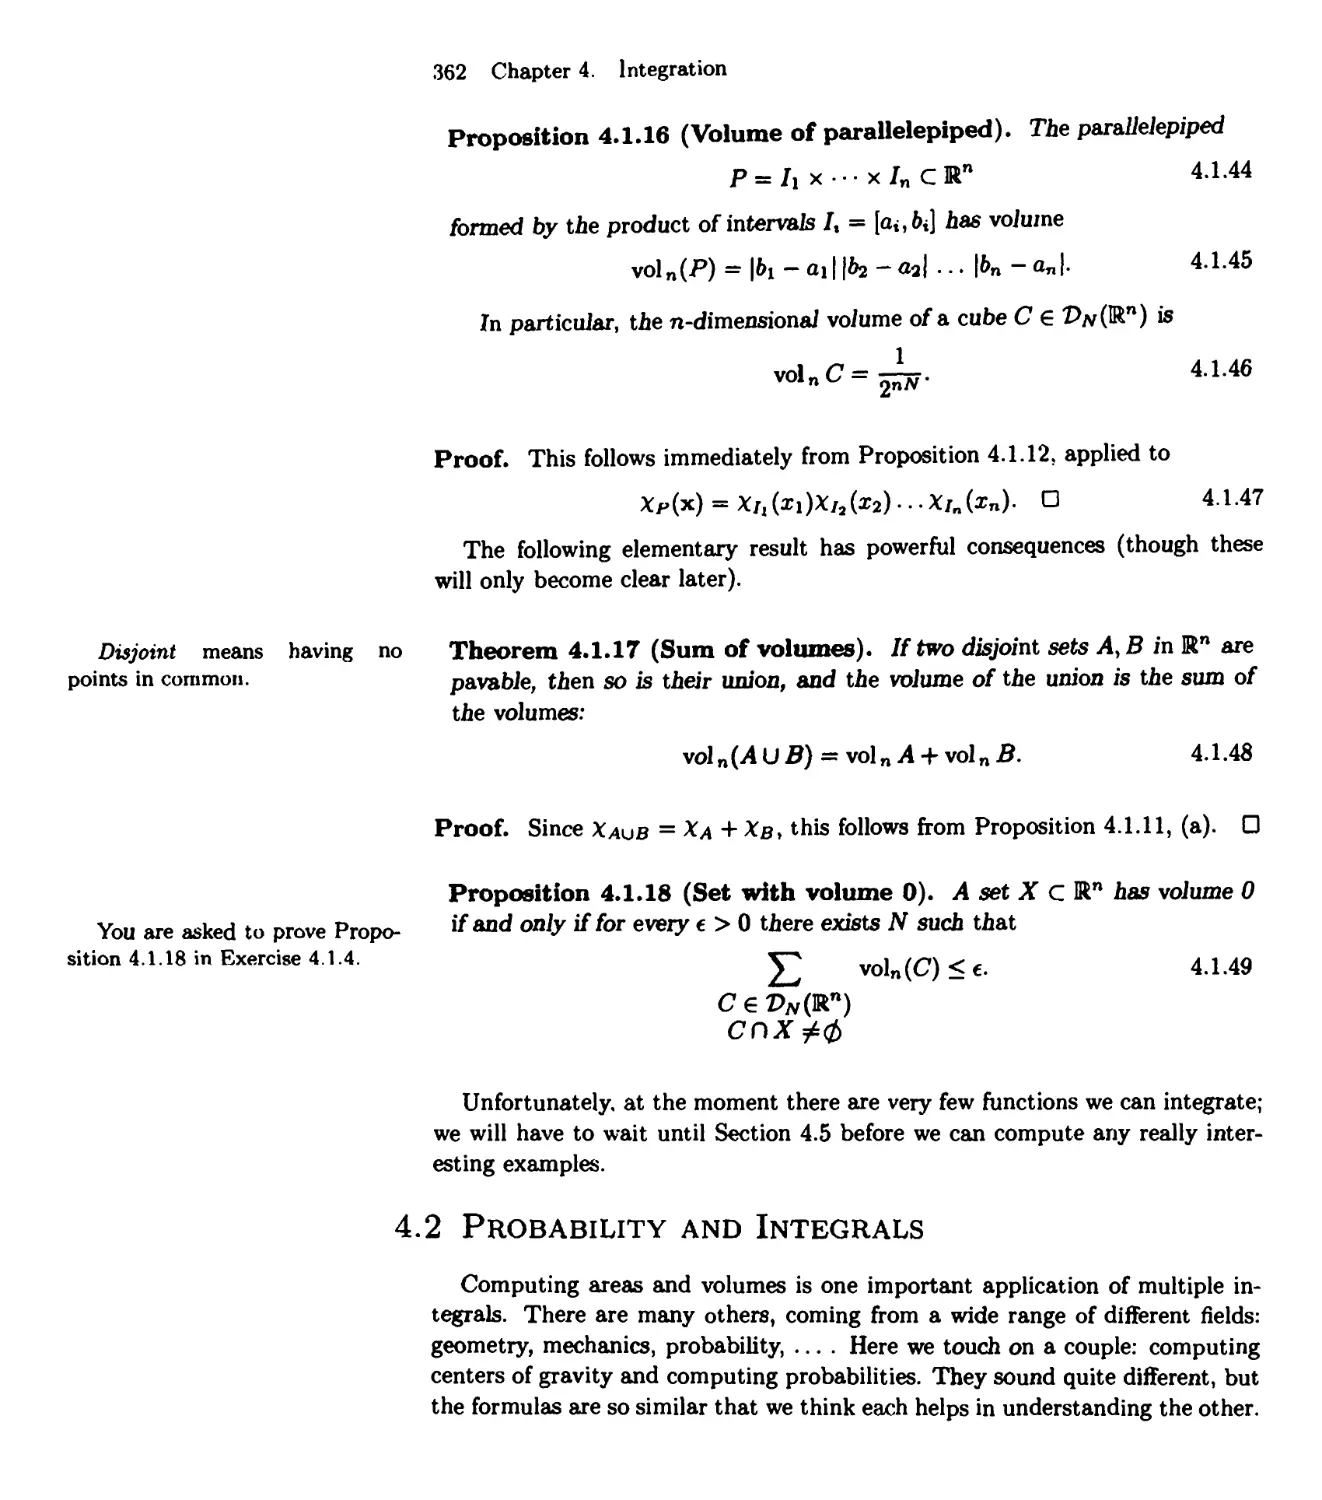 4.2 Probability and Integrals